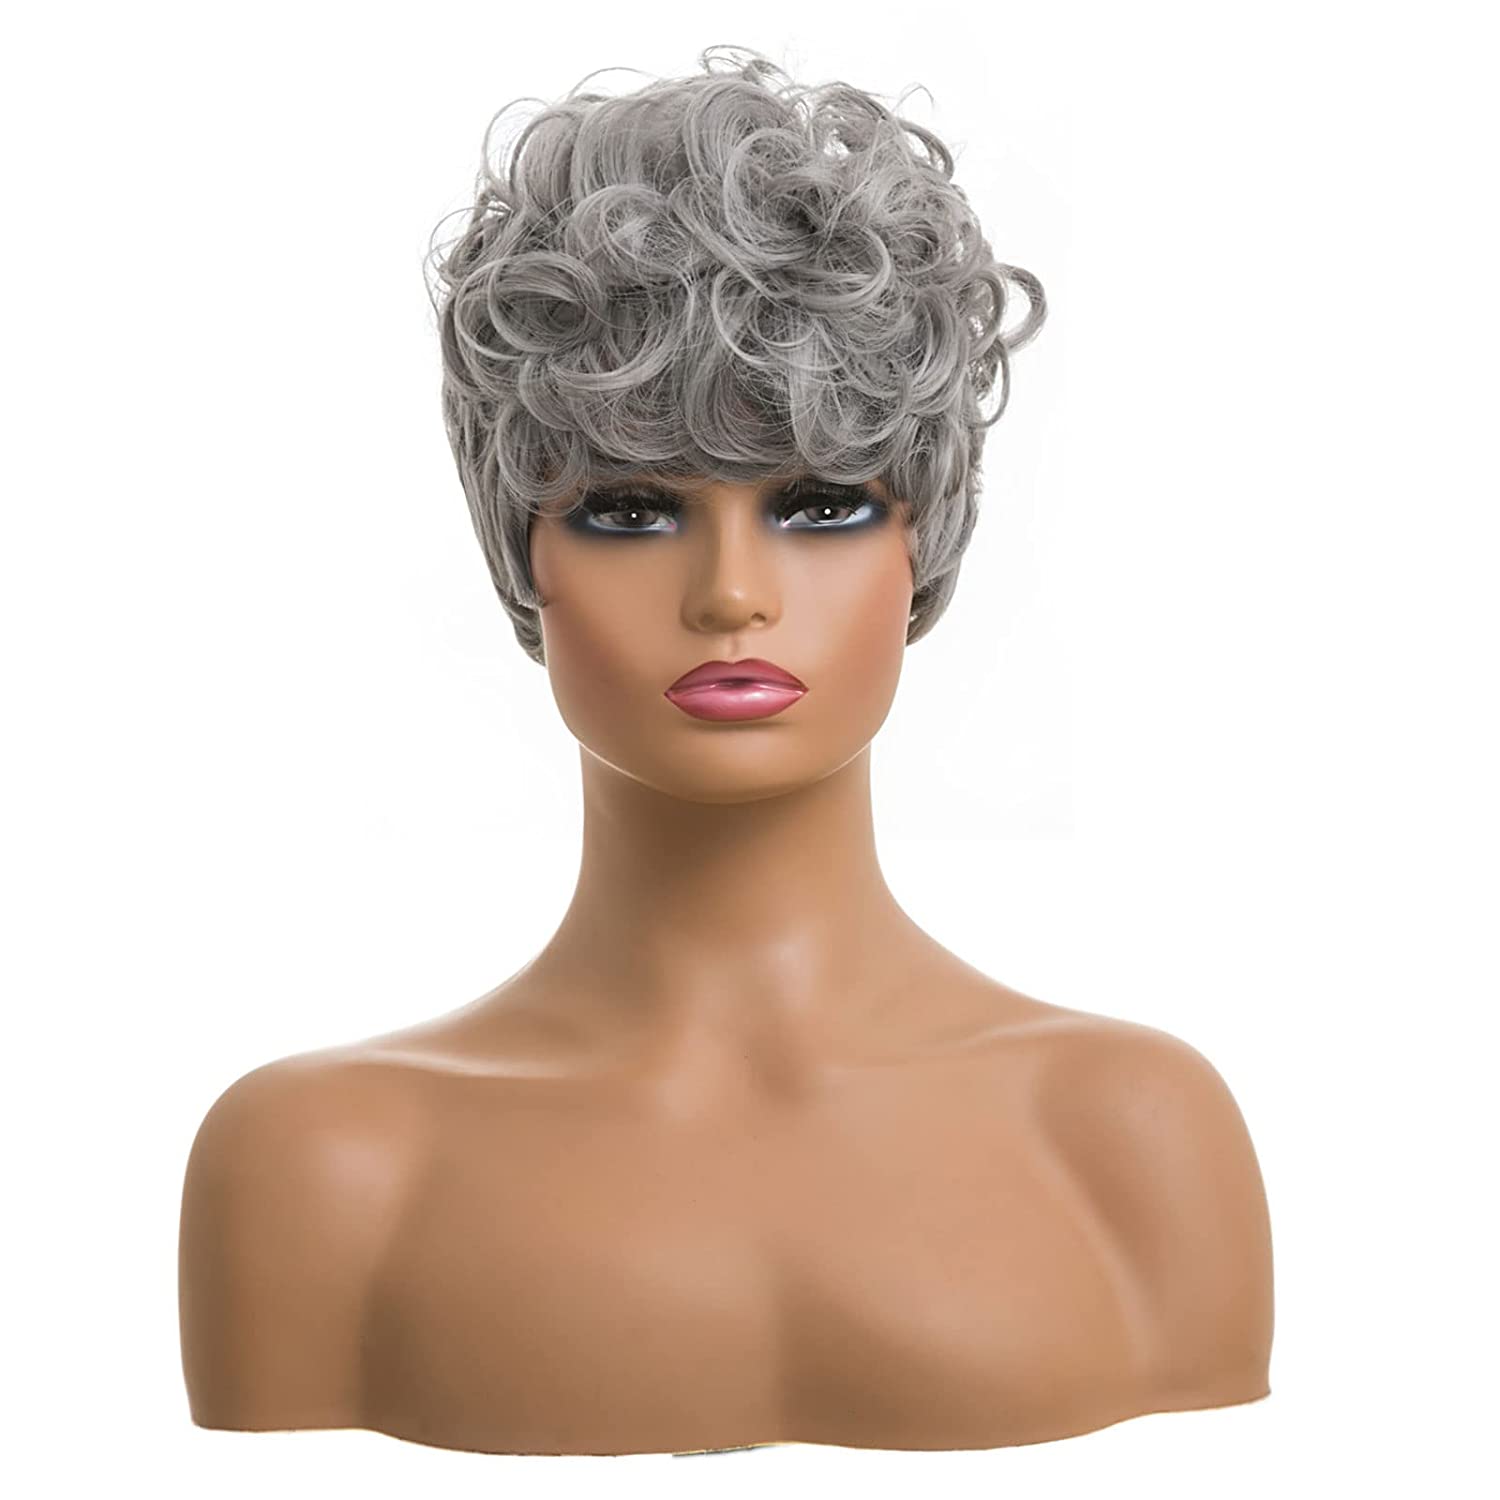 Shop Short Pixie Cut Curly Synthetic Wig Color-Grey Firstina Hair Replacement Short Pixie Cut Wig for Black Women Pixie Cut Wig with  Bangs Short Curly Wigs for Black Women Natural Wavy Layered Pixie Wig for African Hair Color different hair loss hairpiece hair replacement system products including men’s toupees, women’s wigs, toppers and hair extensions, wholesalers, including online shop owners, salon owners, hair stylists regional wig and hair system hairpieces distributors.feelmorelikeuhair.com